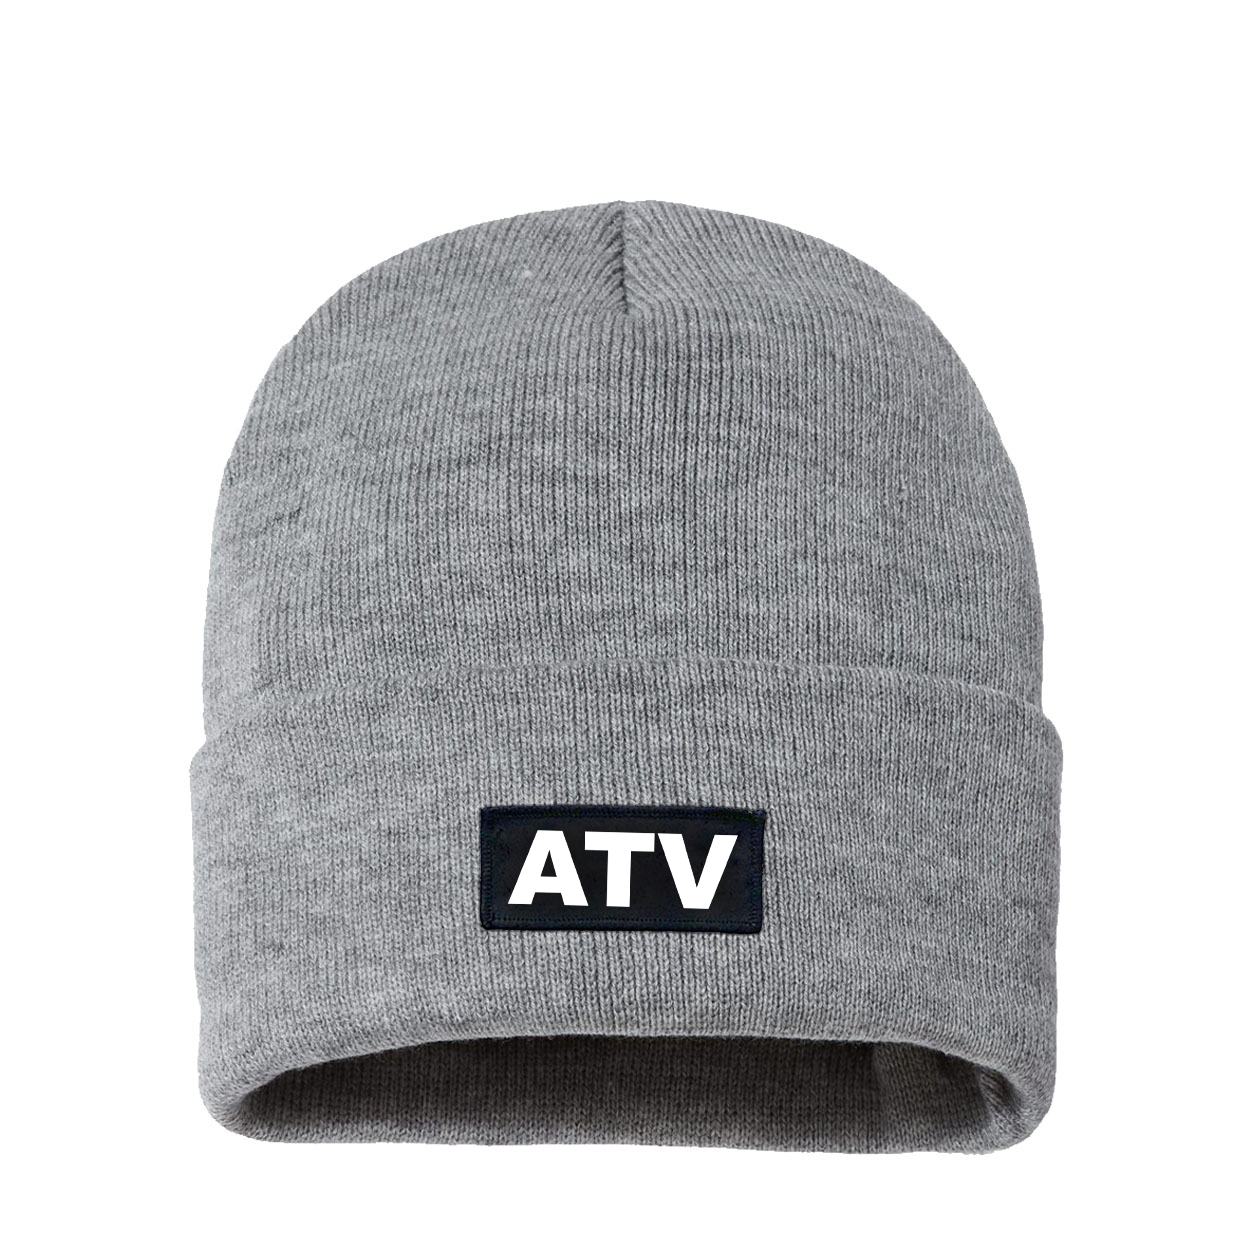 ATV Brand Logo Night Out Woven Patch Sherpa Lined Cuffed Beanie Heather Gray